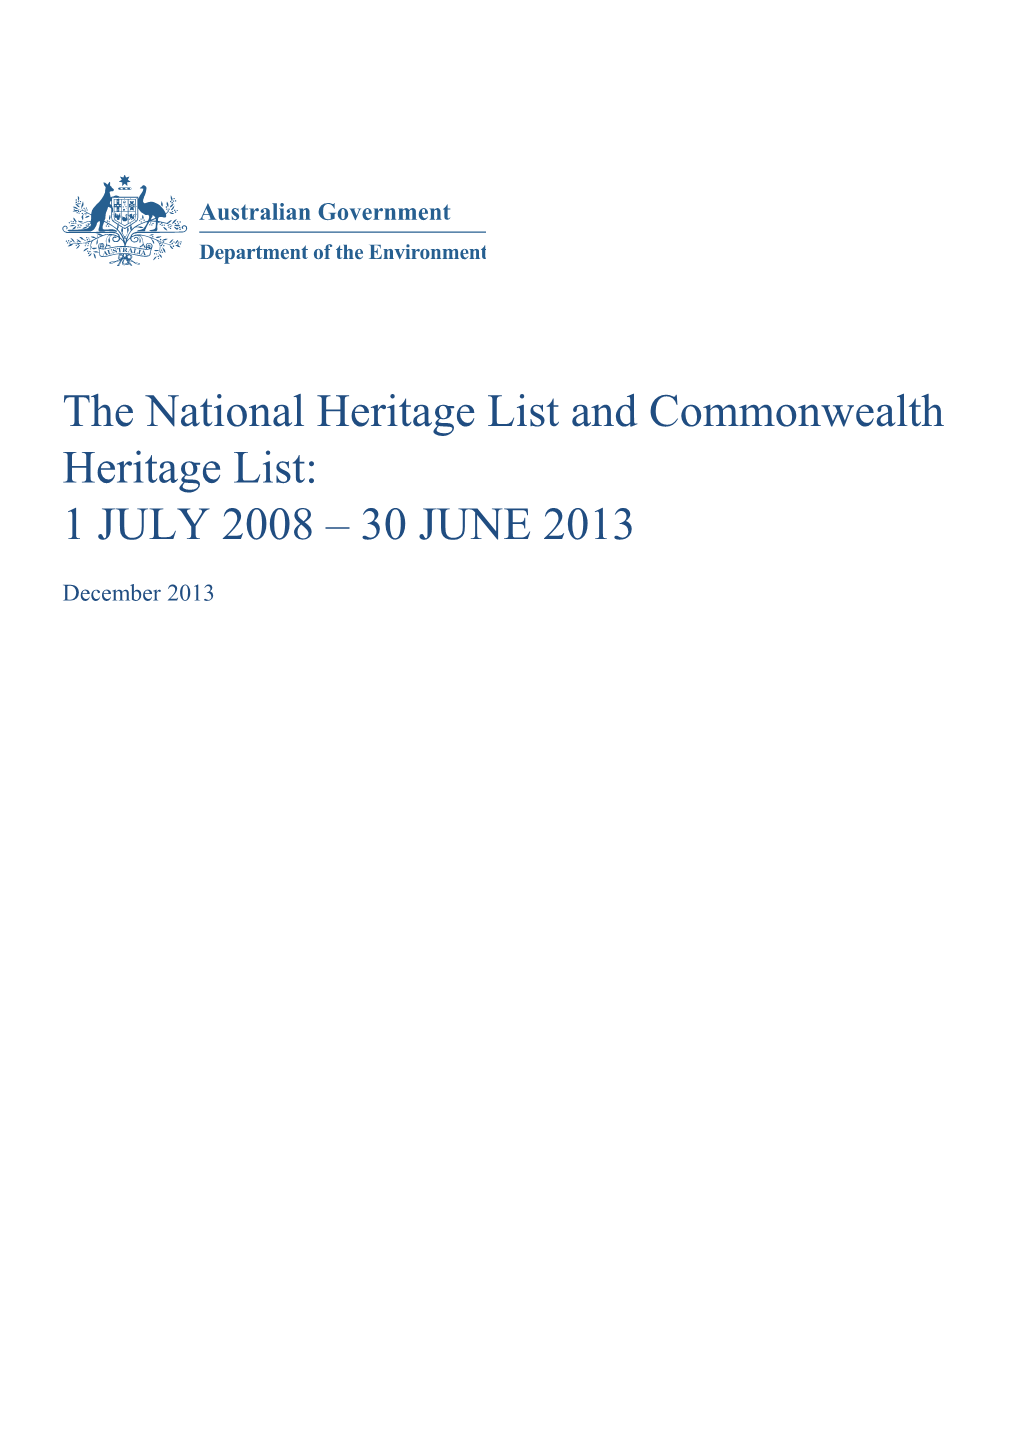 The National Heritage List and Commonwealth Heritage List: 1 JULY 2008 30 JUNE 2013